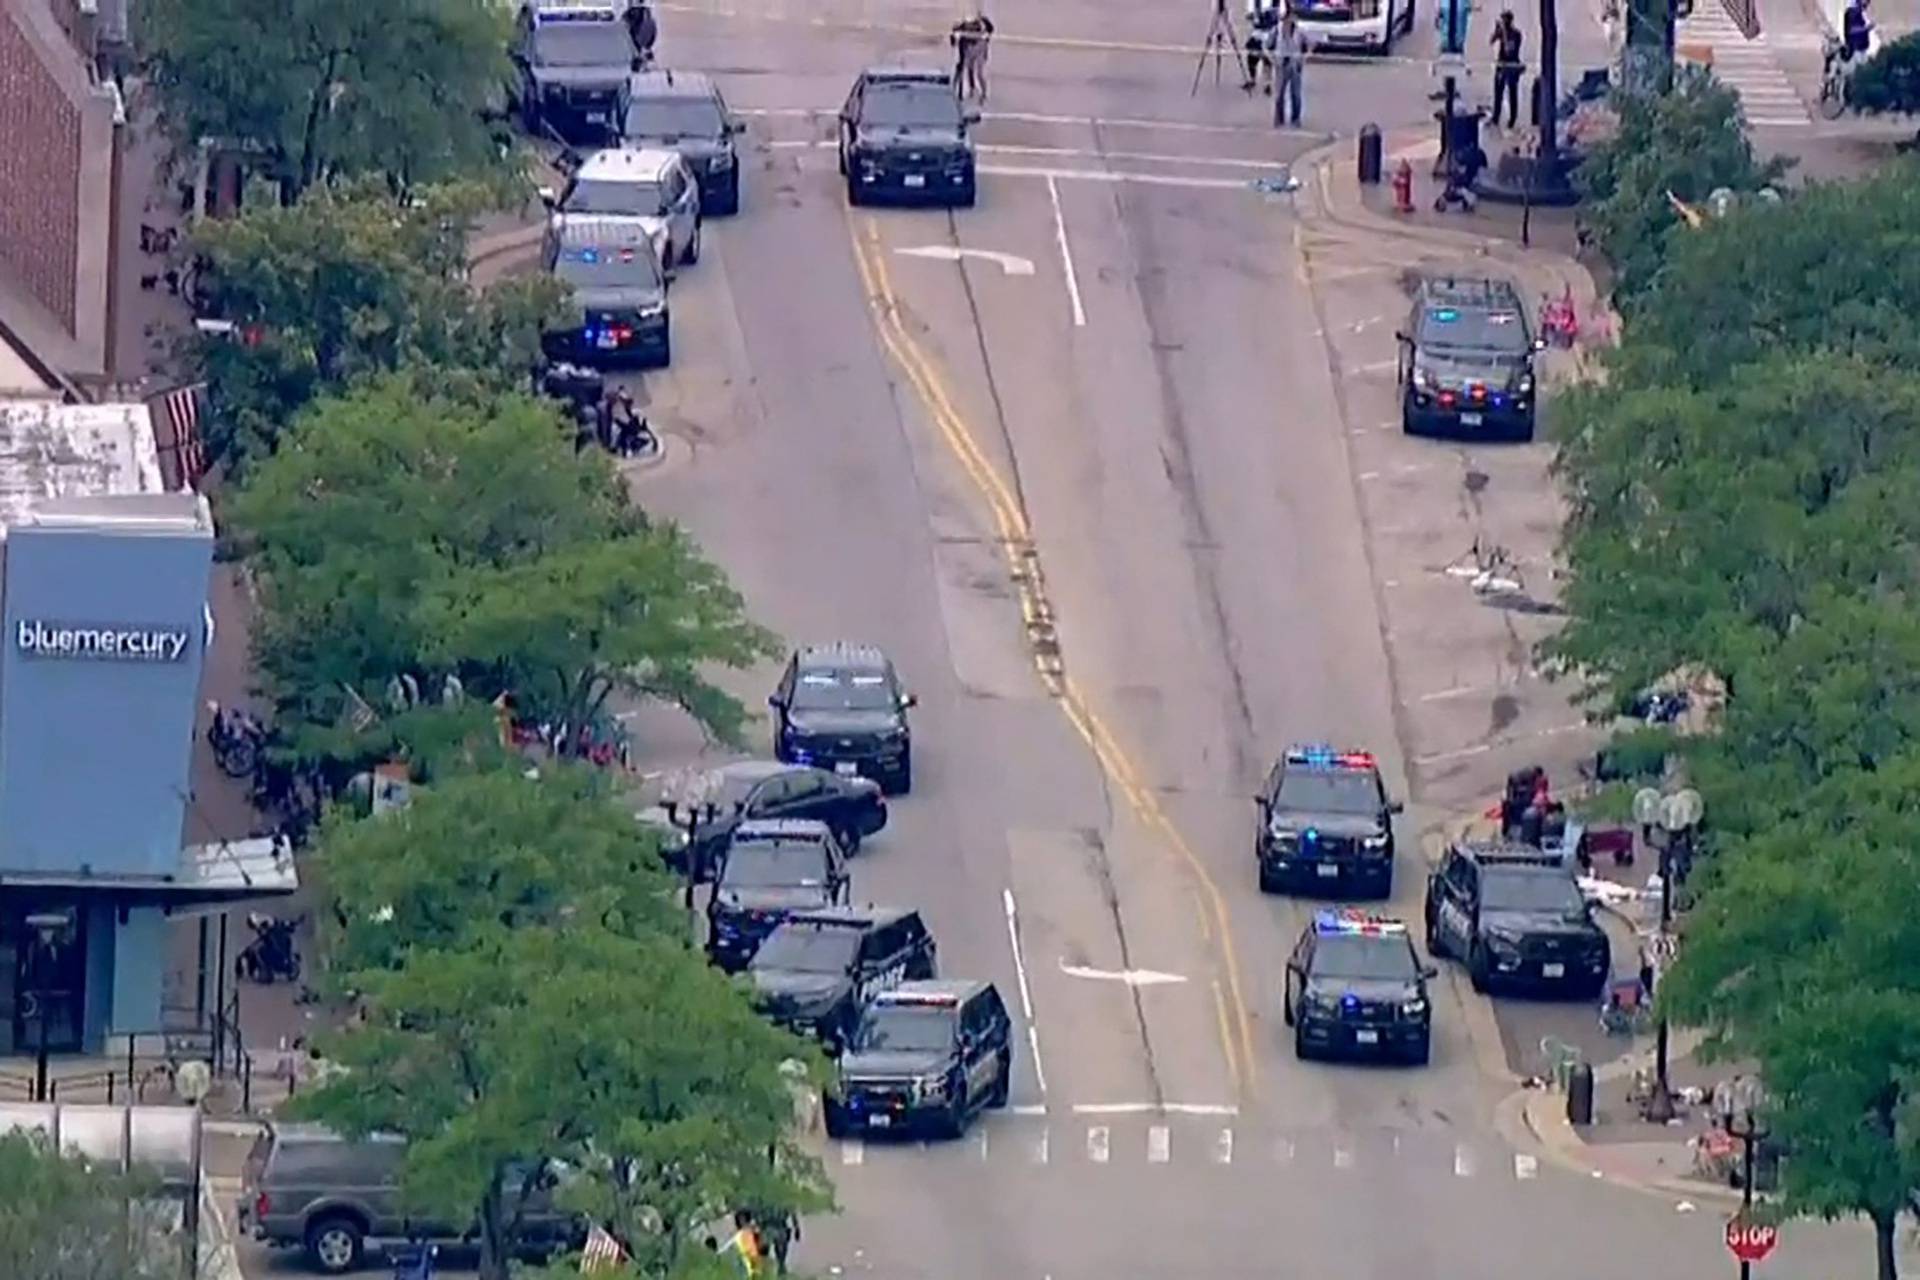 Gunfire at a Fourth of July parade in Highland Park